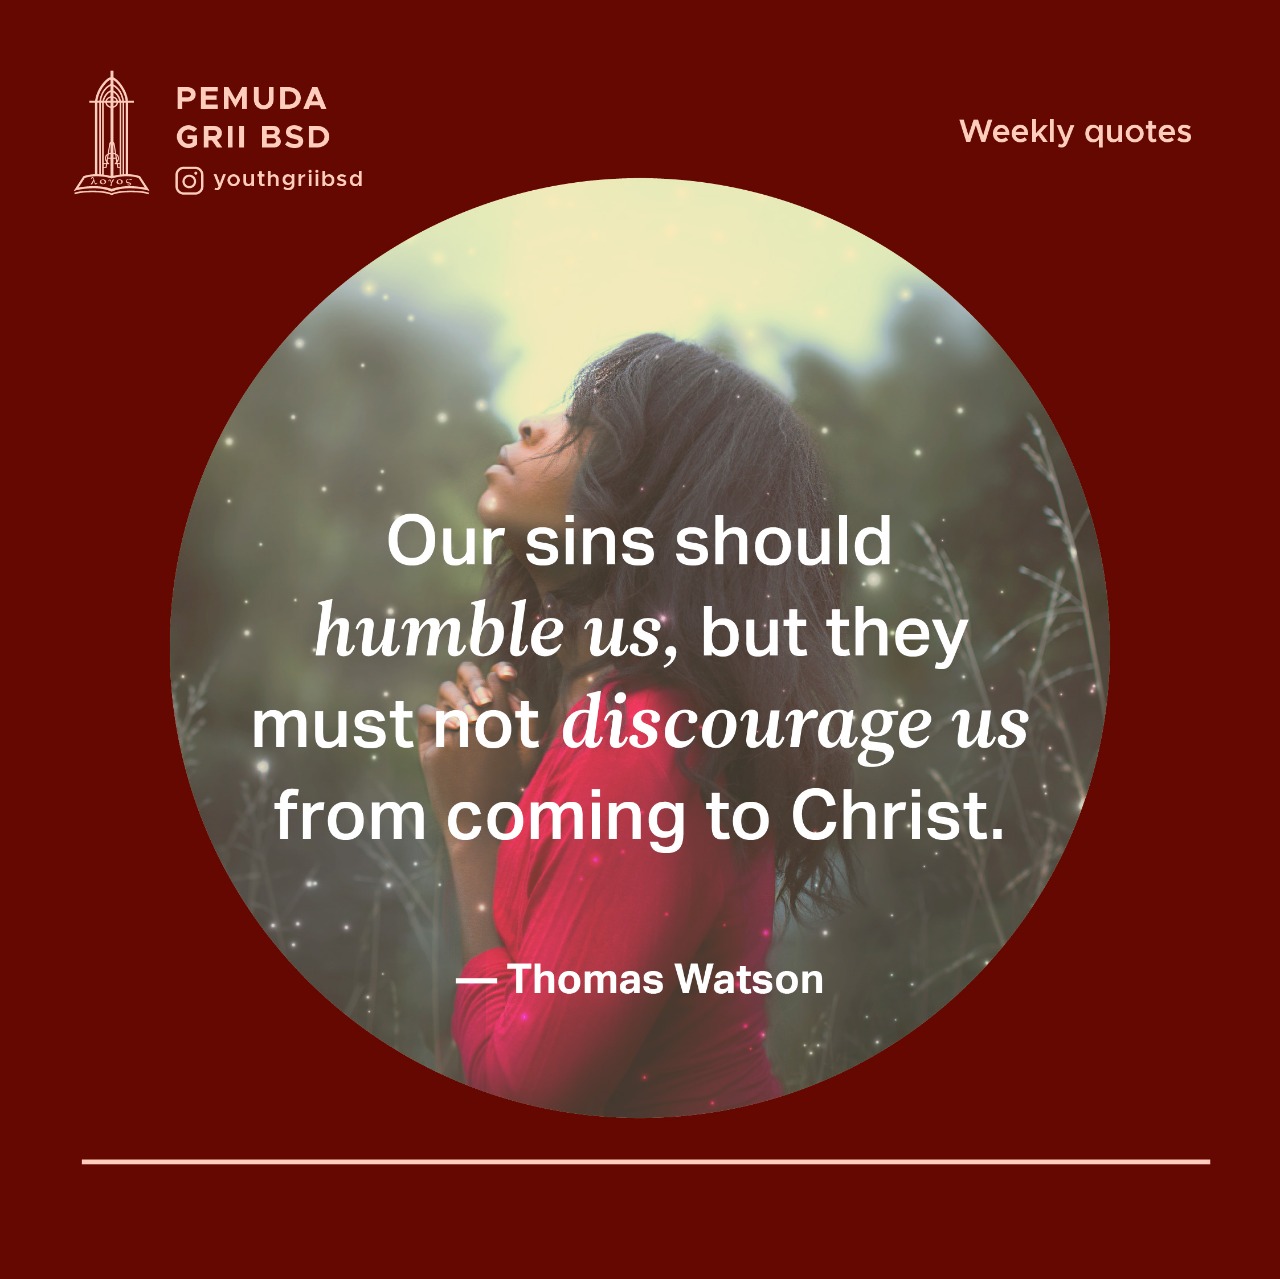 Our sins should humble us, but they must not discourage us from coming to Christ.